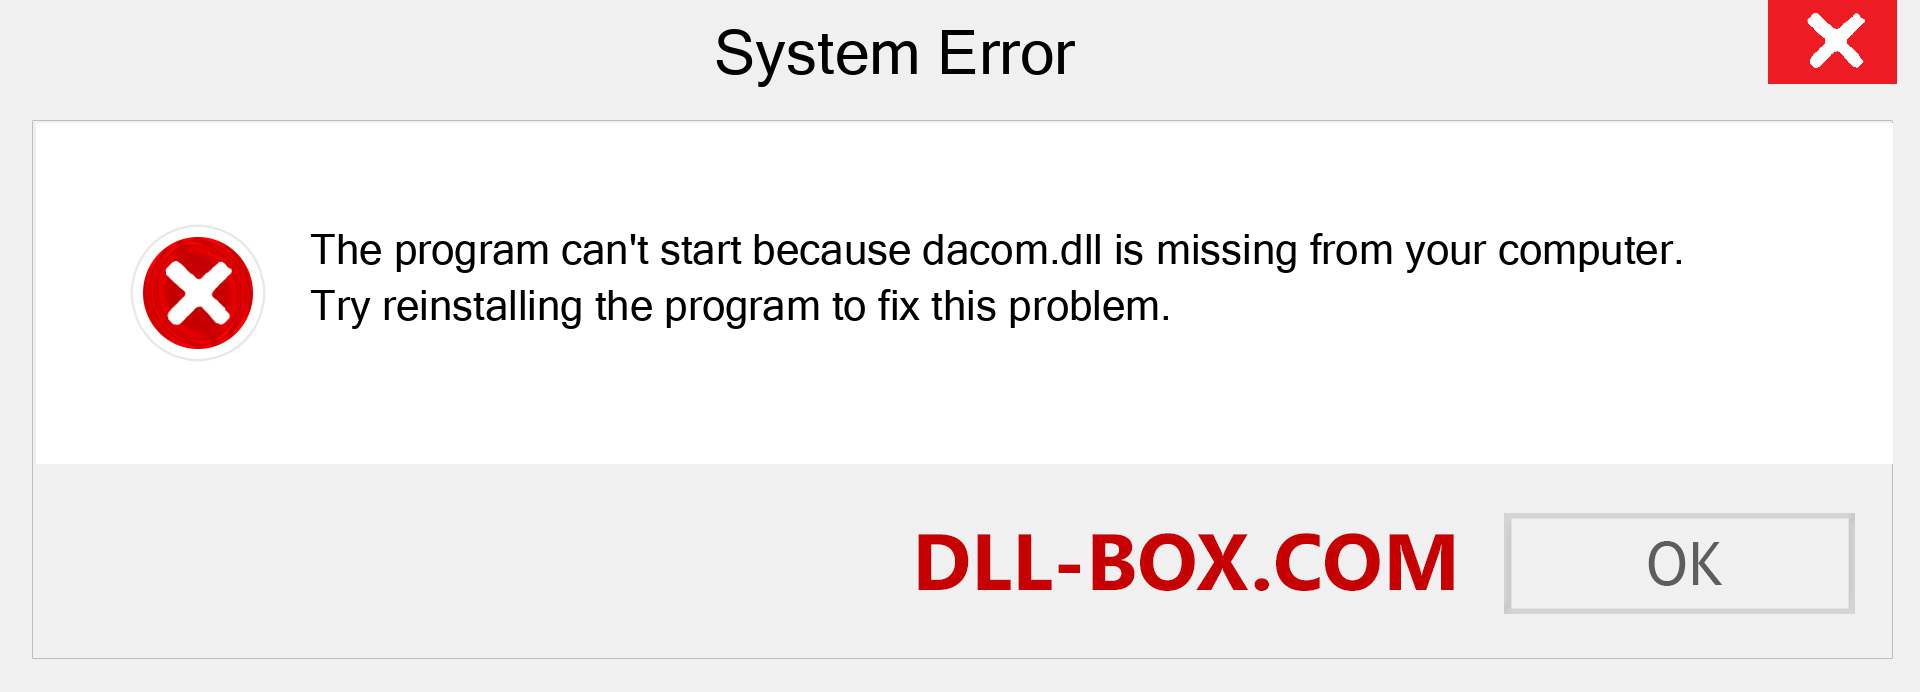  dacom.dll file is missing?. Download for Windows 7, 8, 10 - Fix  dacom dll Missing Error on Windows, photos, images